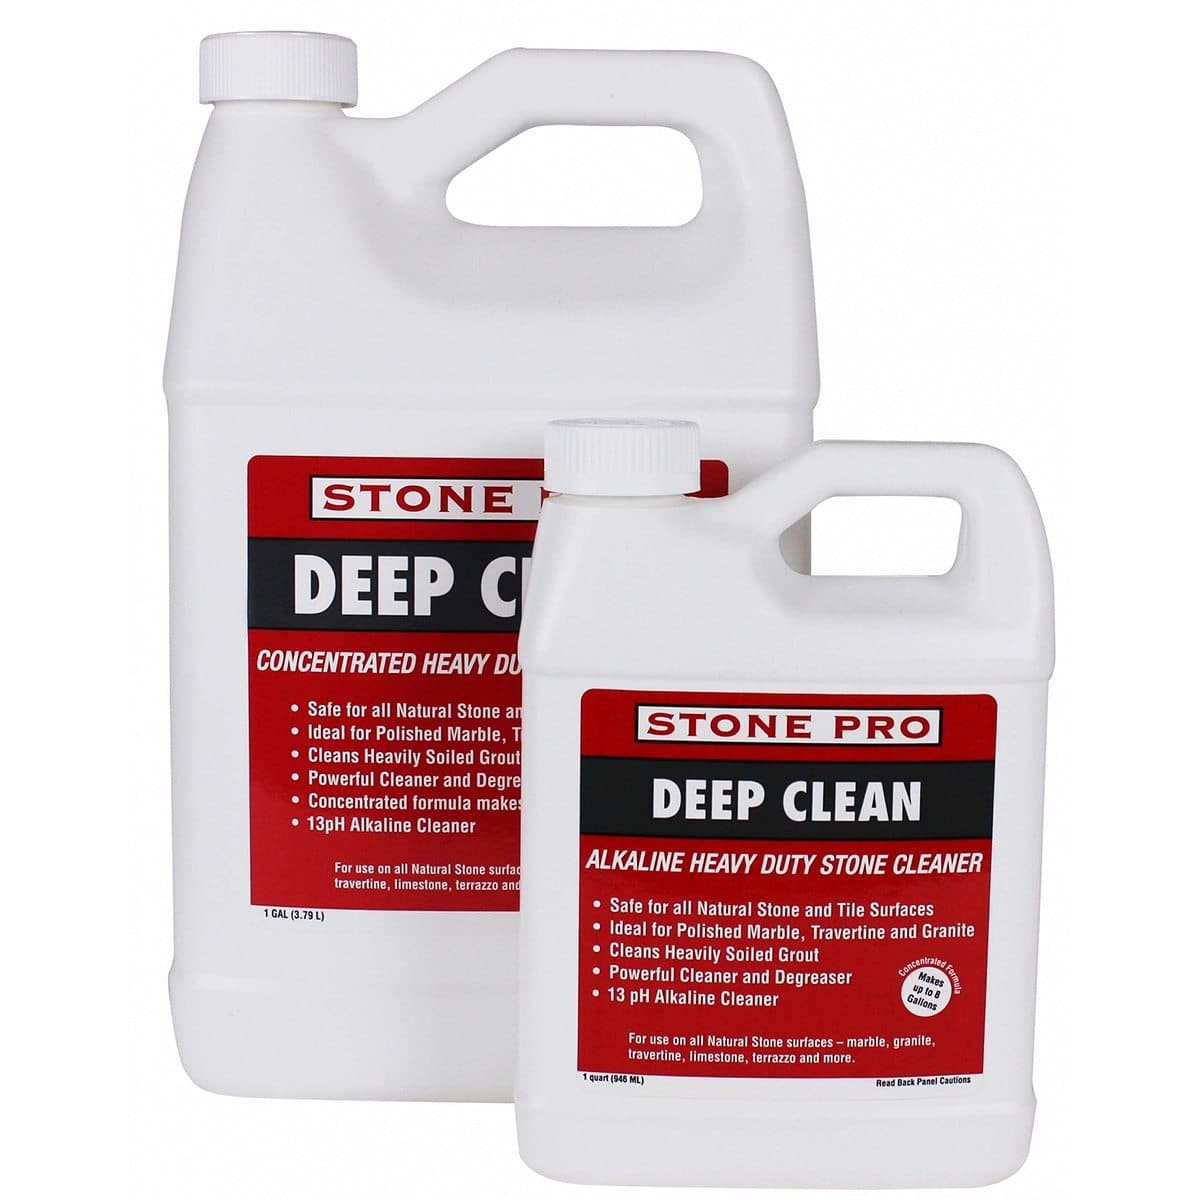 https://cdn.shopify.com/s/files/1/0551/8396/6382/products/deep-clean-concentrate-738367.jpg?crop=center&height=1200&v=1694448022&width=1200